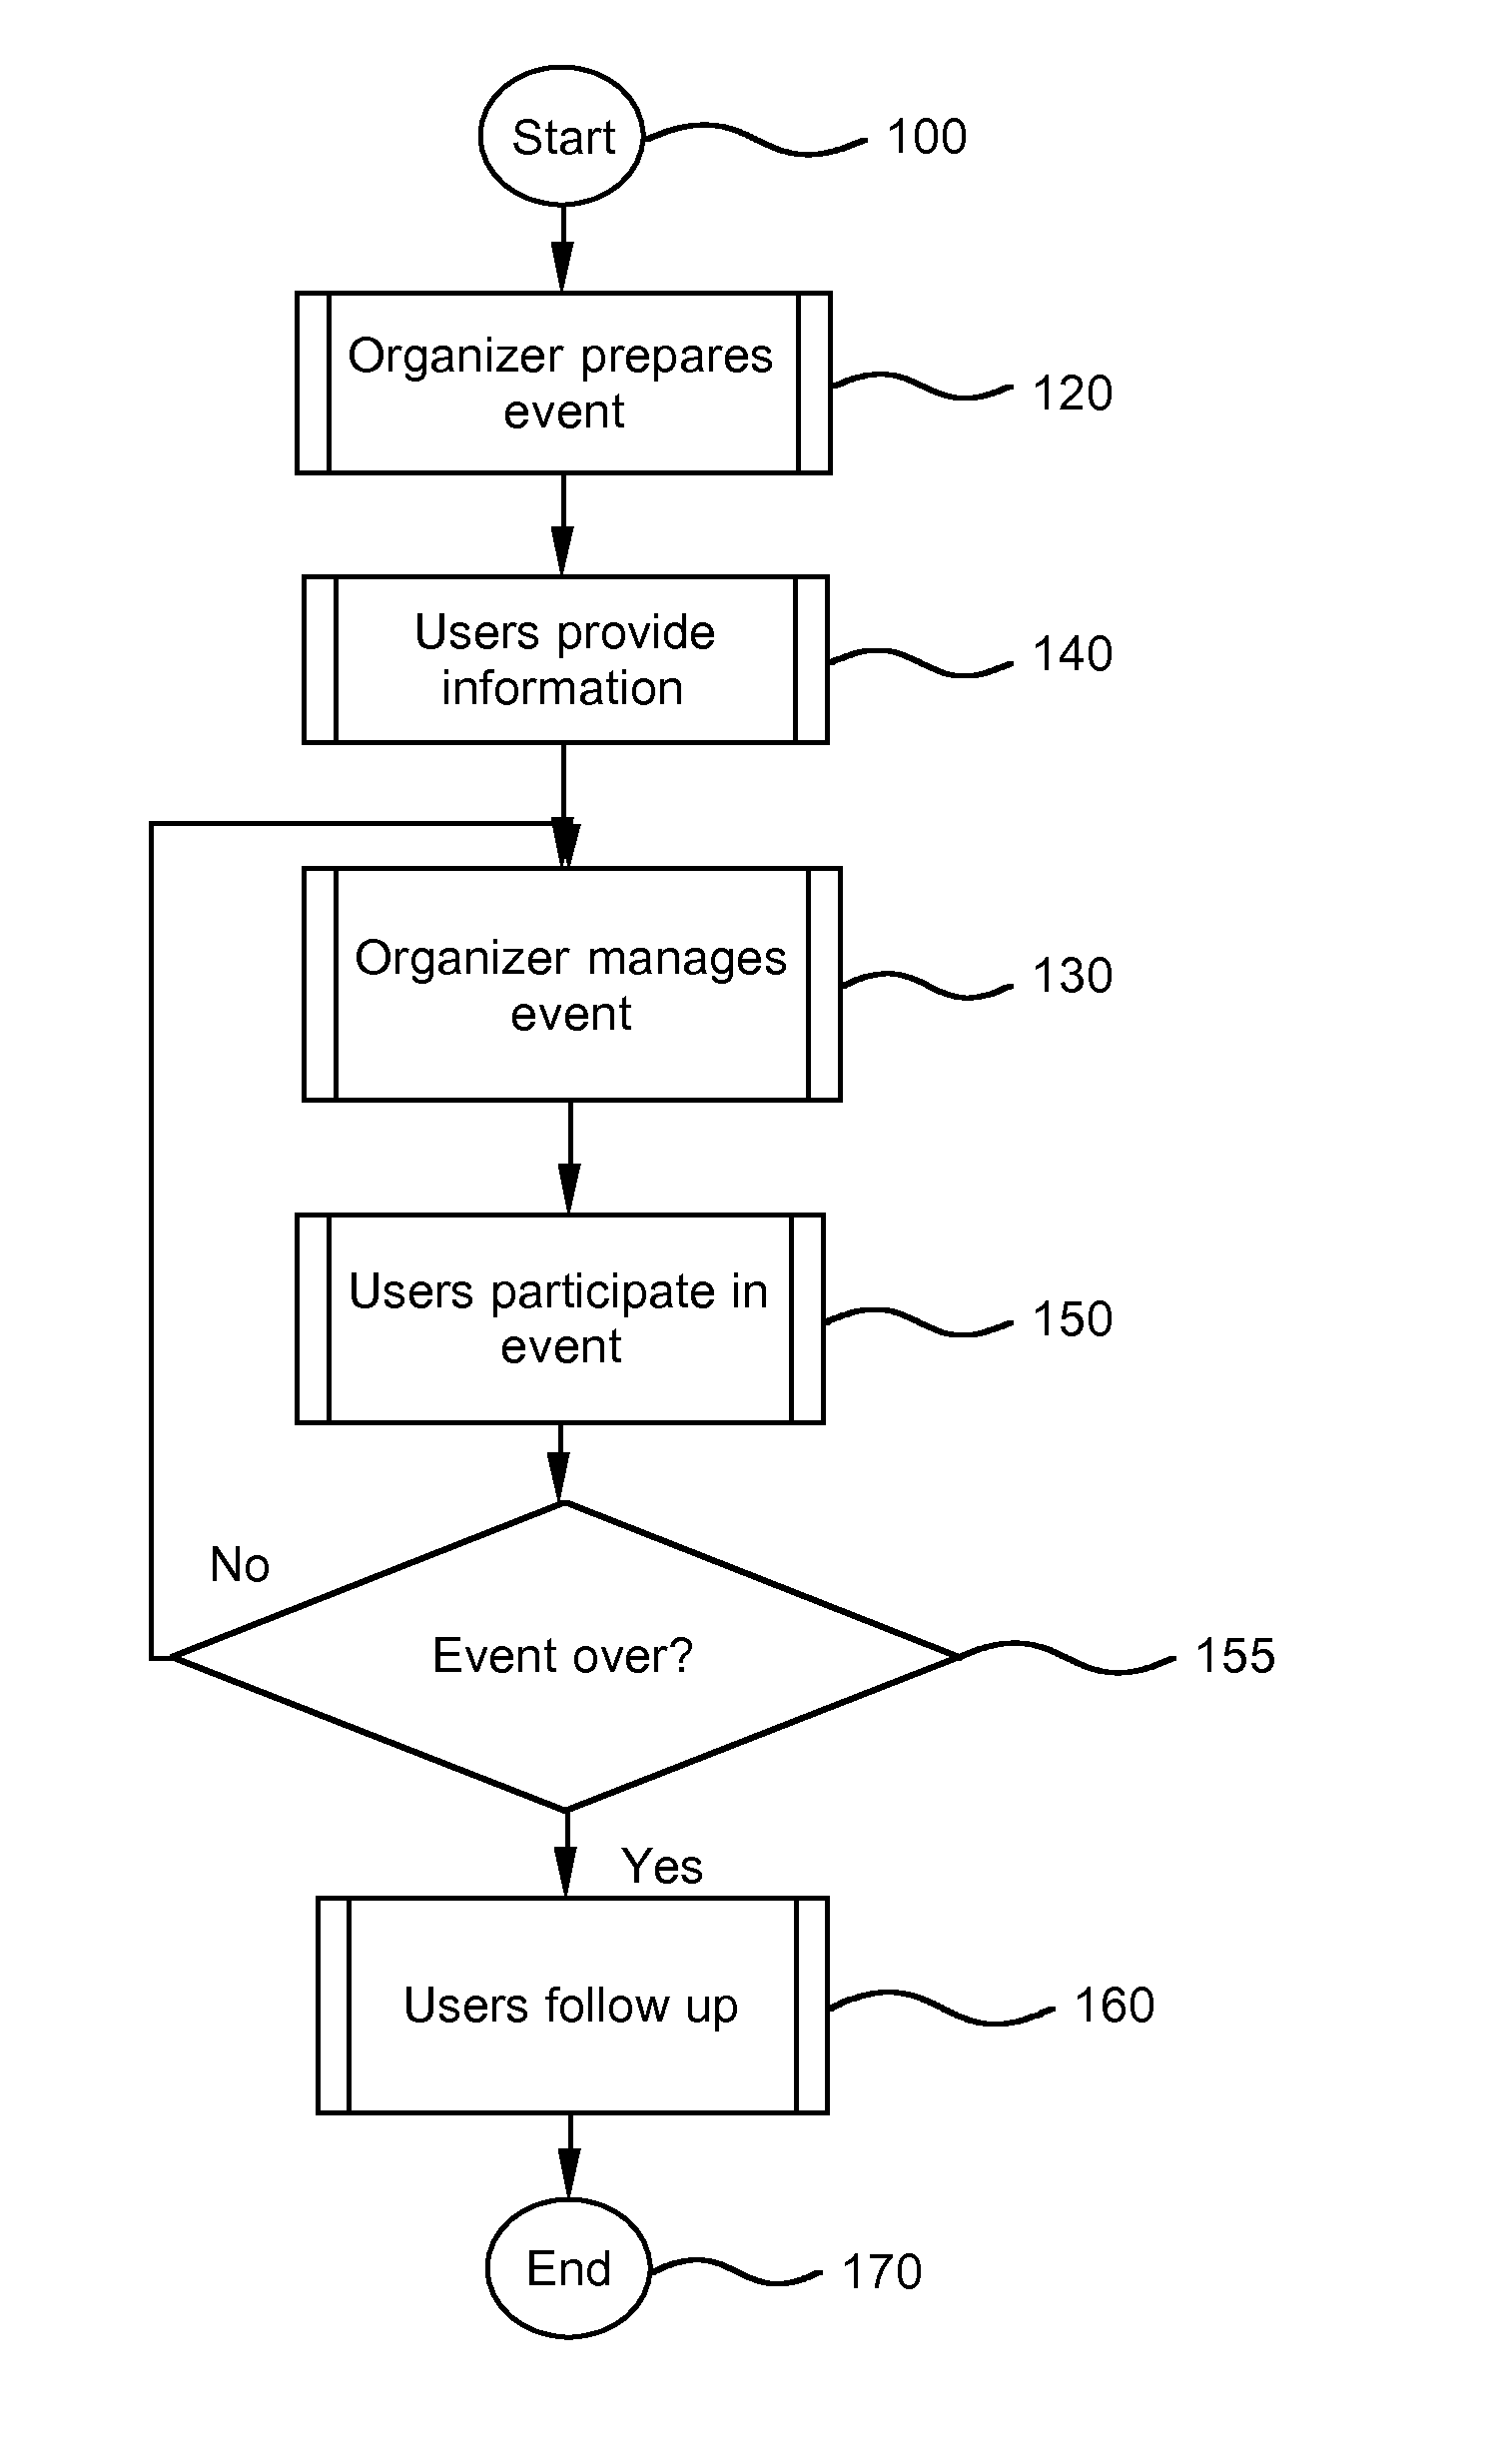 Computerized matching and introduction systems and methods